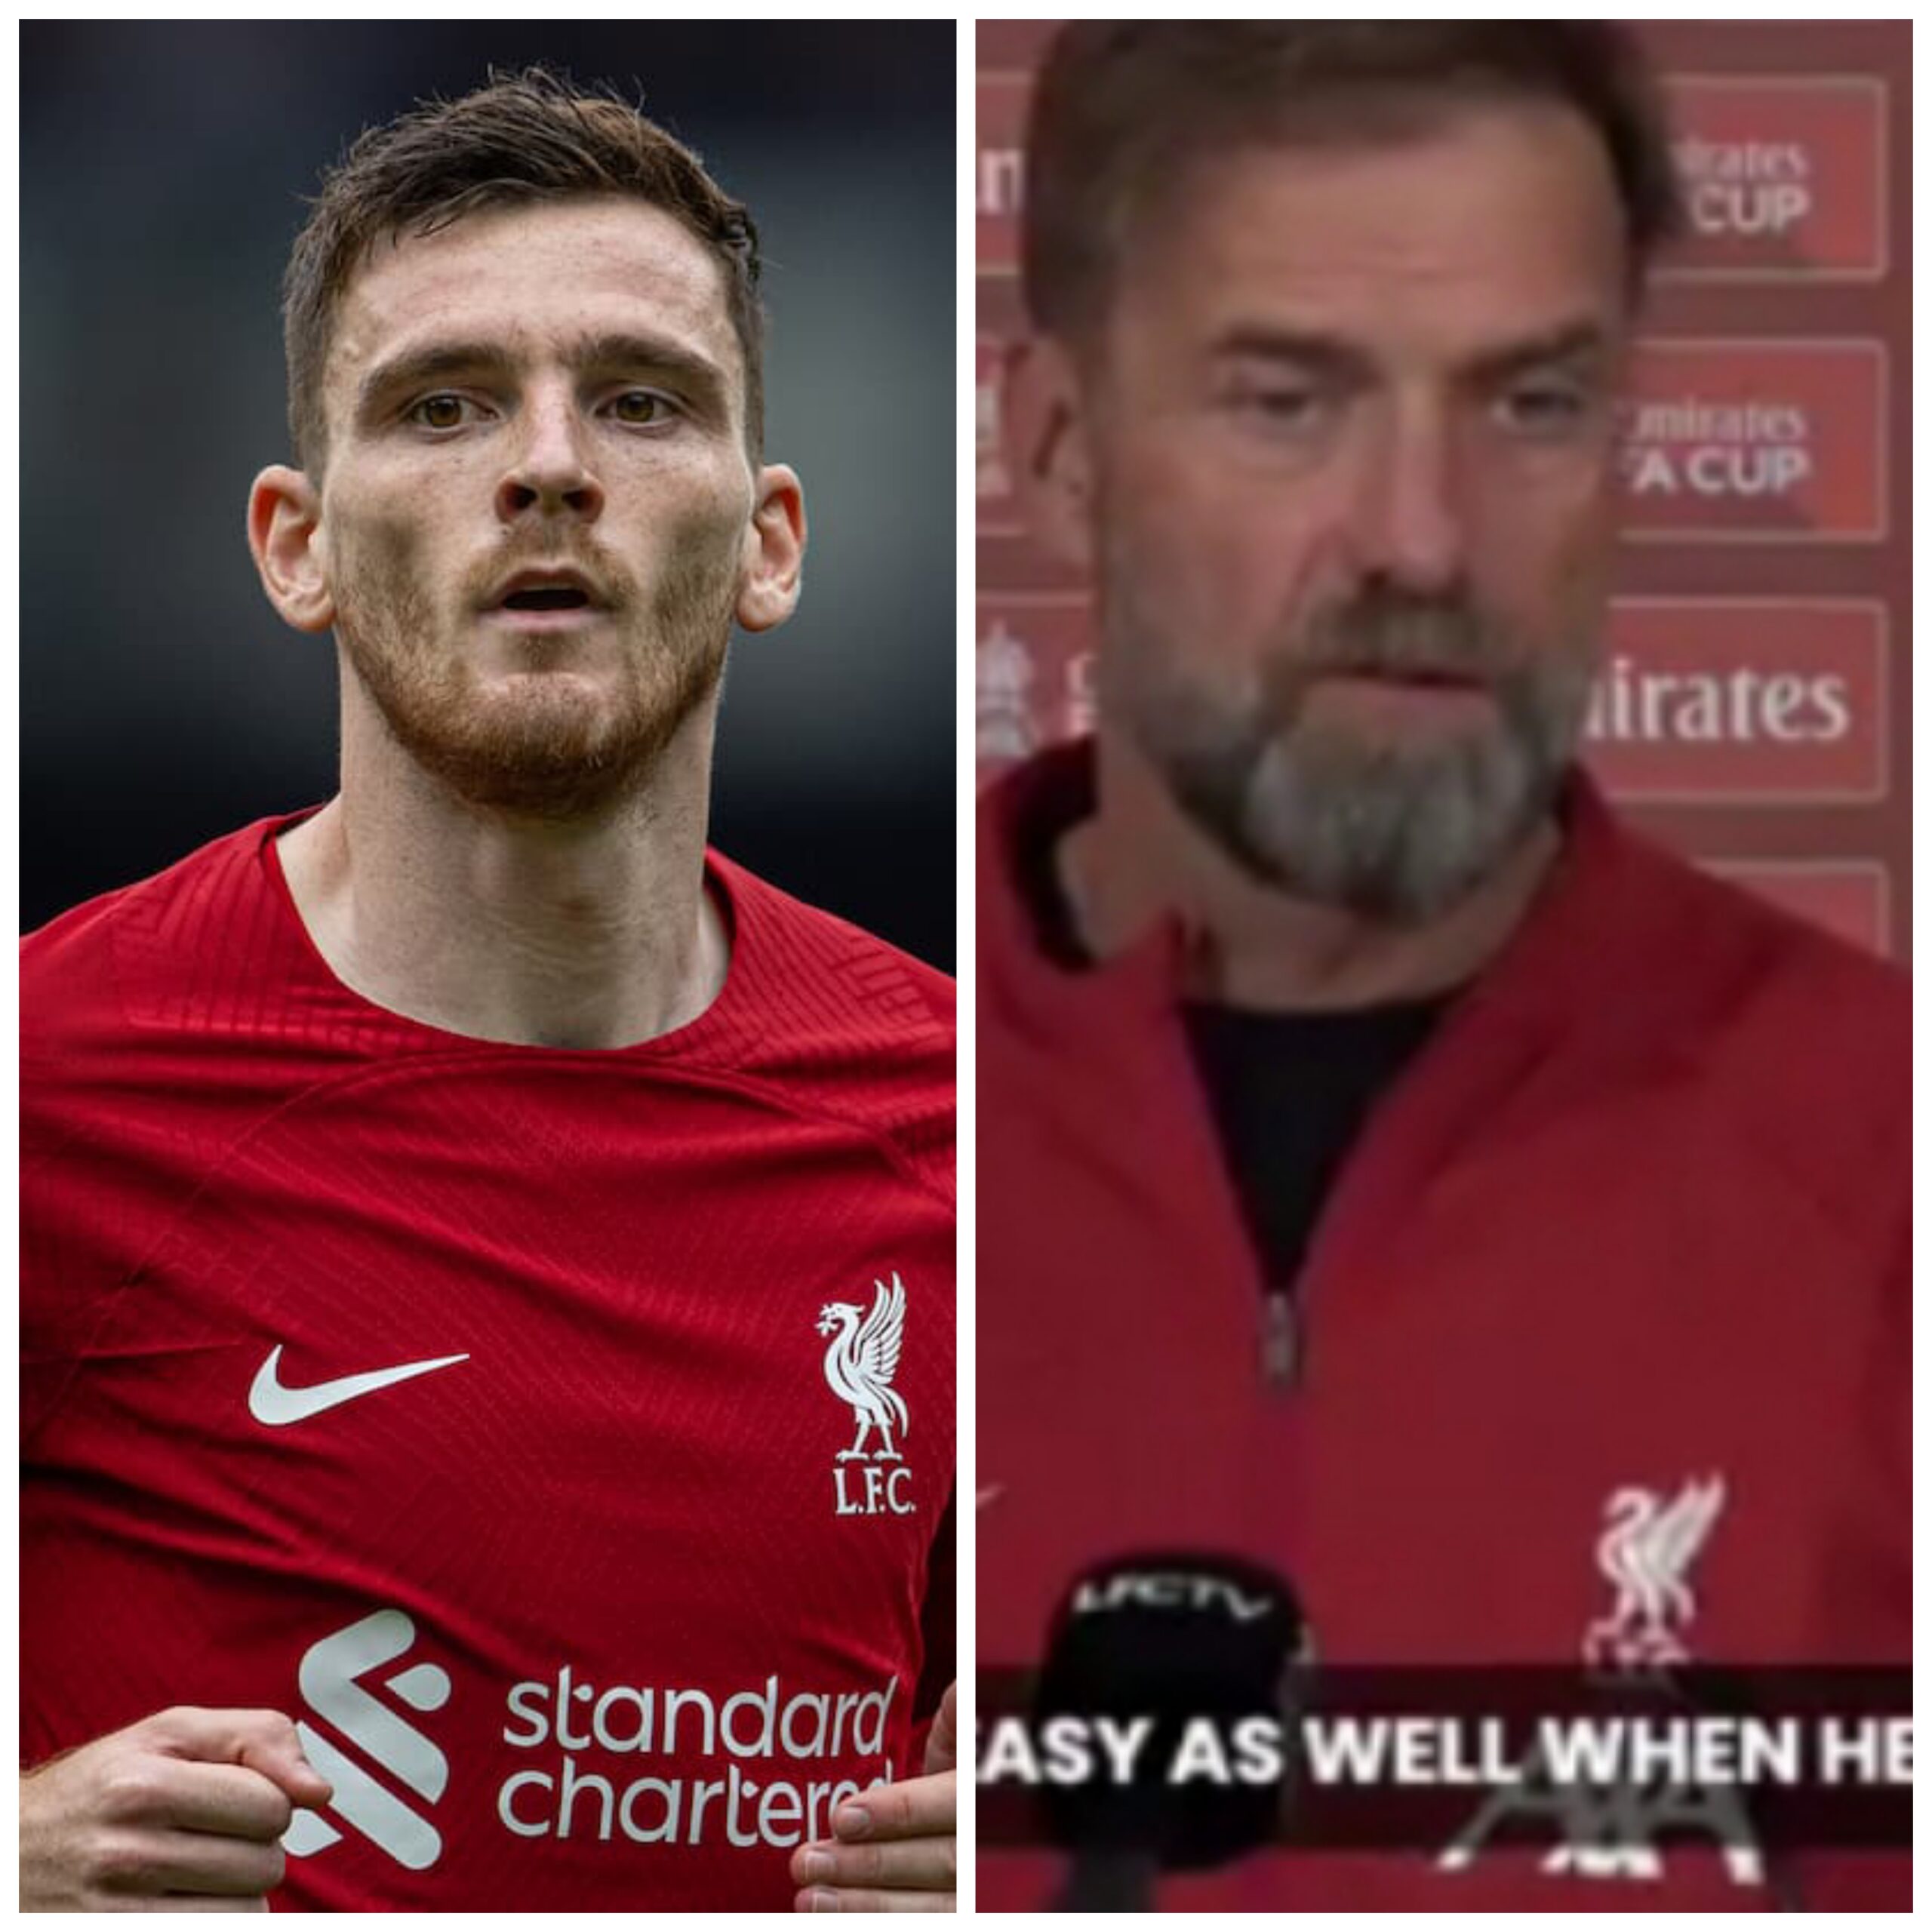 "Not True"-Jurgen Klopp reacts to Andy Robertson's blunt claim that Liverpool are getting worse 14 Sportelo